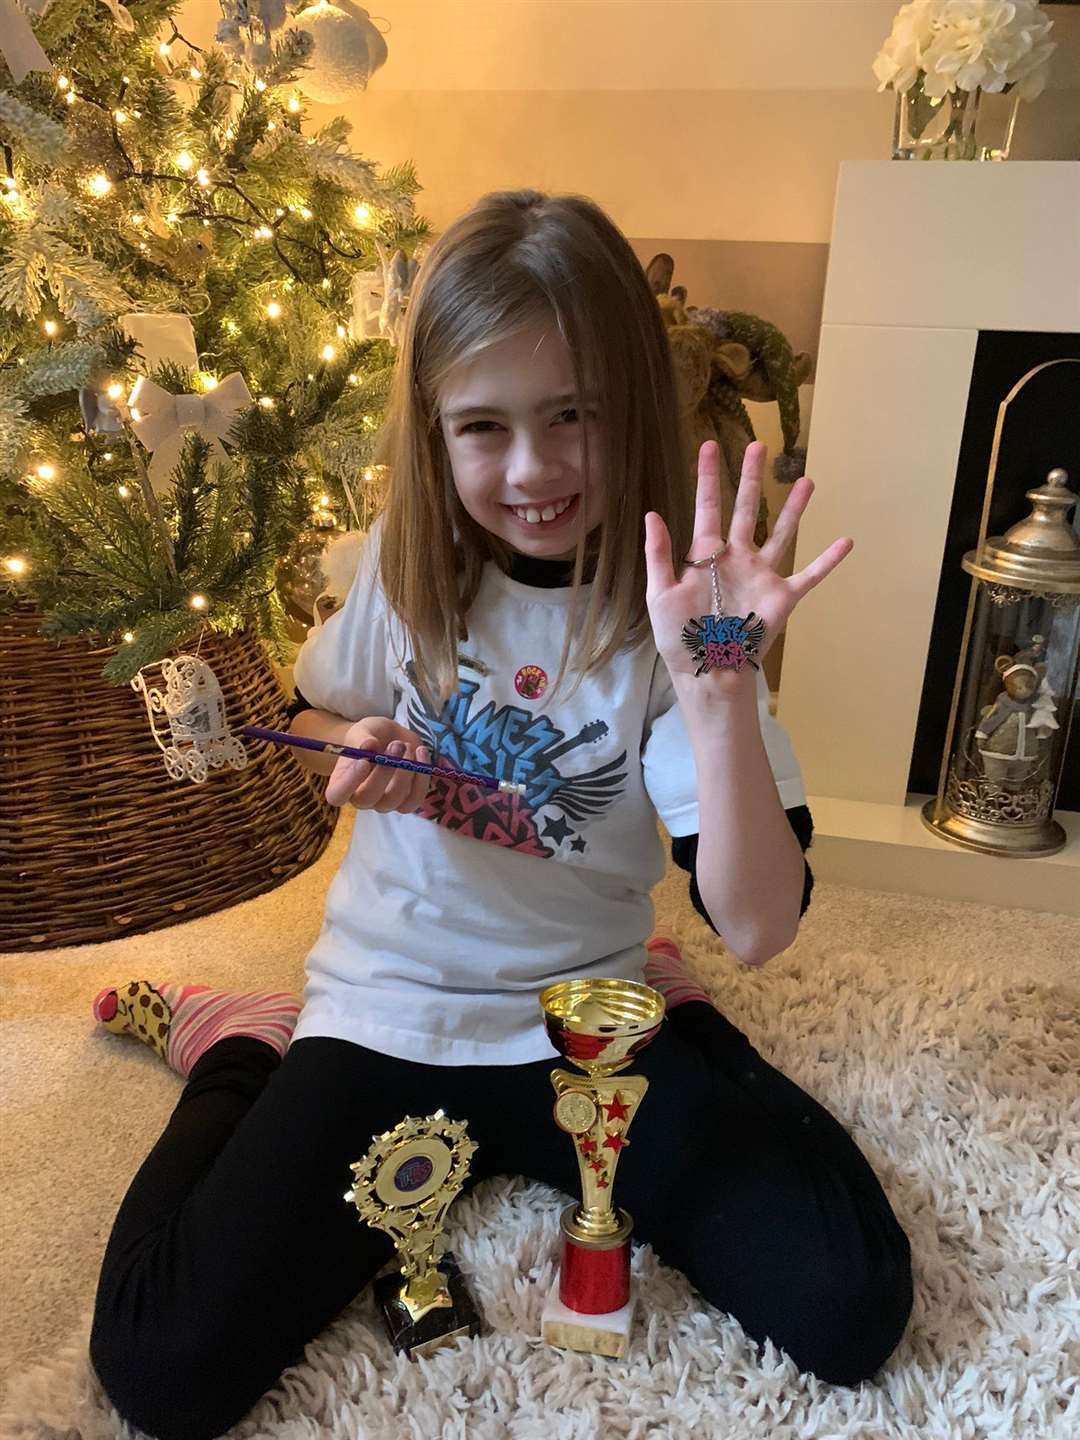 Bobbing School pupil Brooke Cressey pictured with her TTRockstars T-shirt and trophies Picture: Mark Cressey